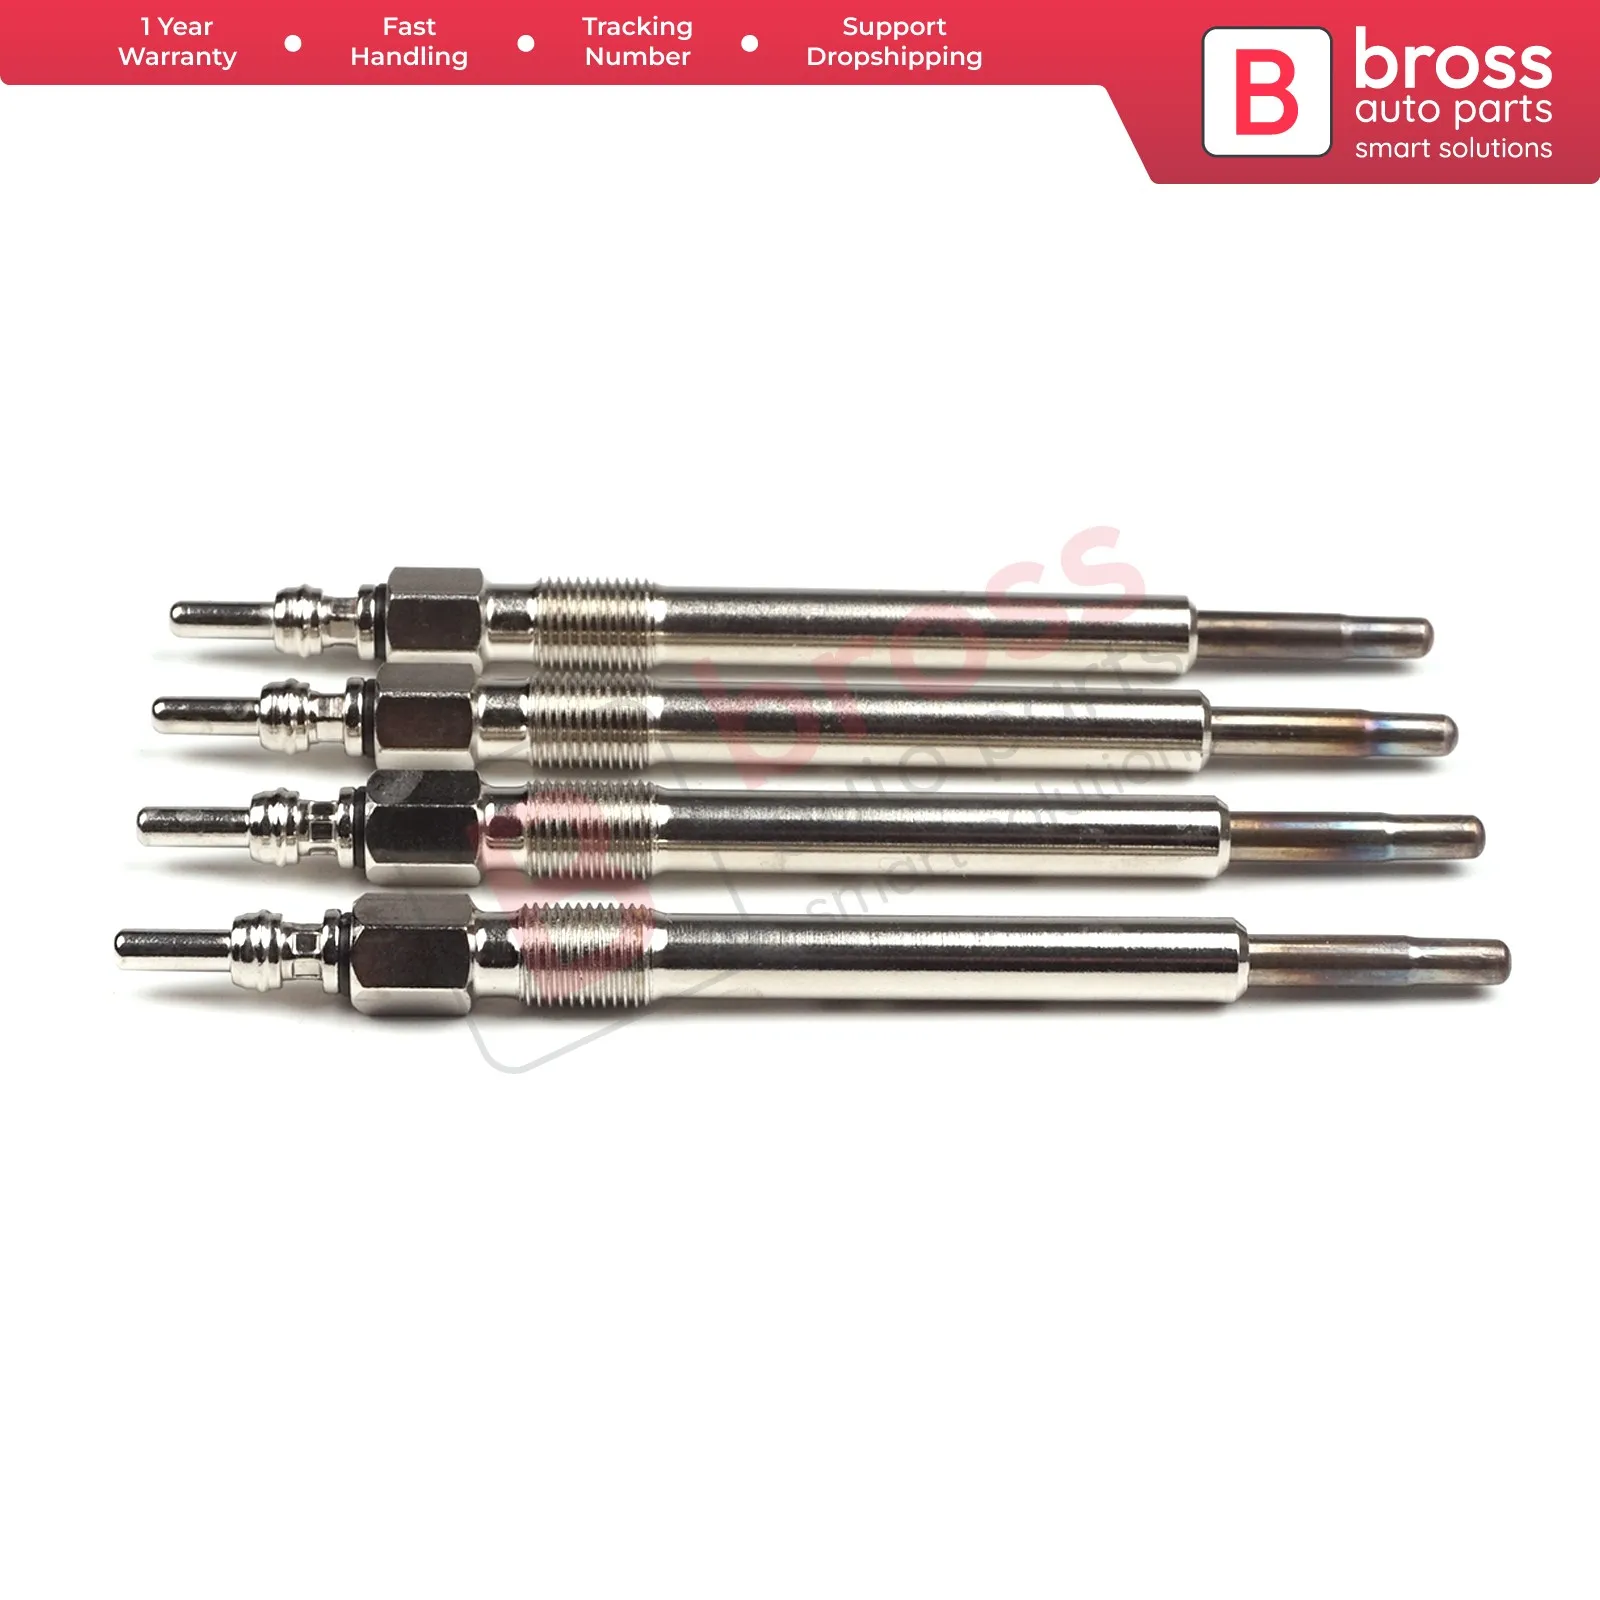 

Bross Auto Parts BGP13-1 4 Pcs Heater Glow Plugs GX123, 05066840AA, GN055 for Chrysler Voyager Jeep BMC Ship From Turkey